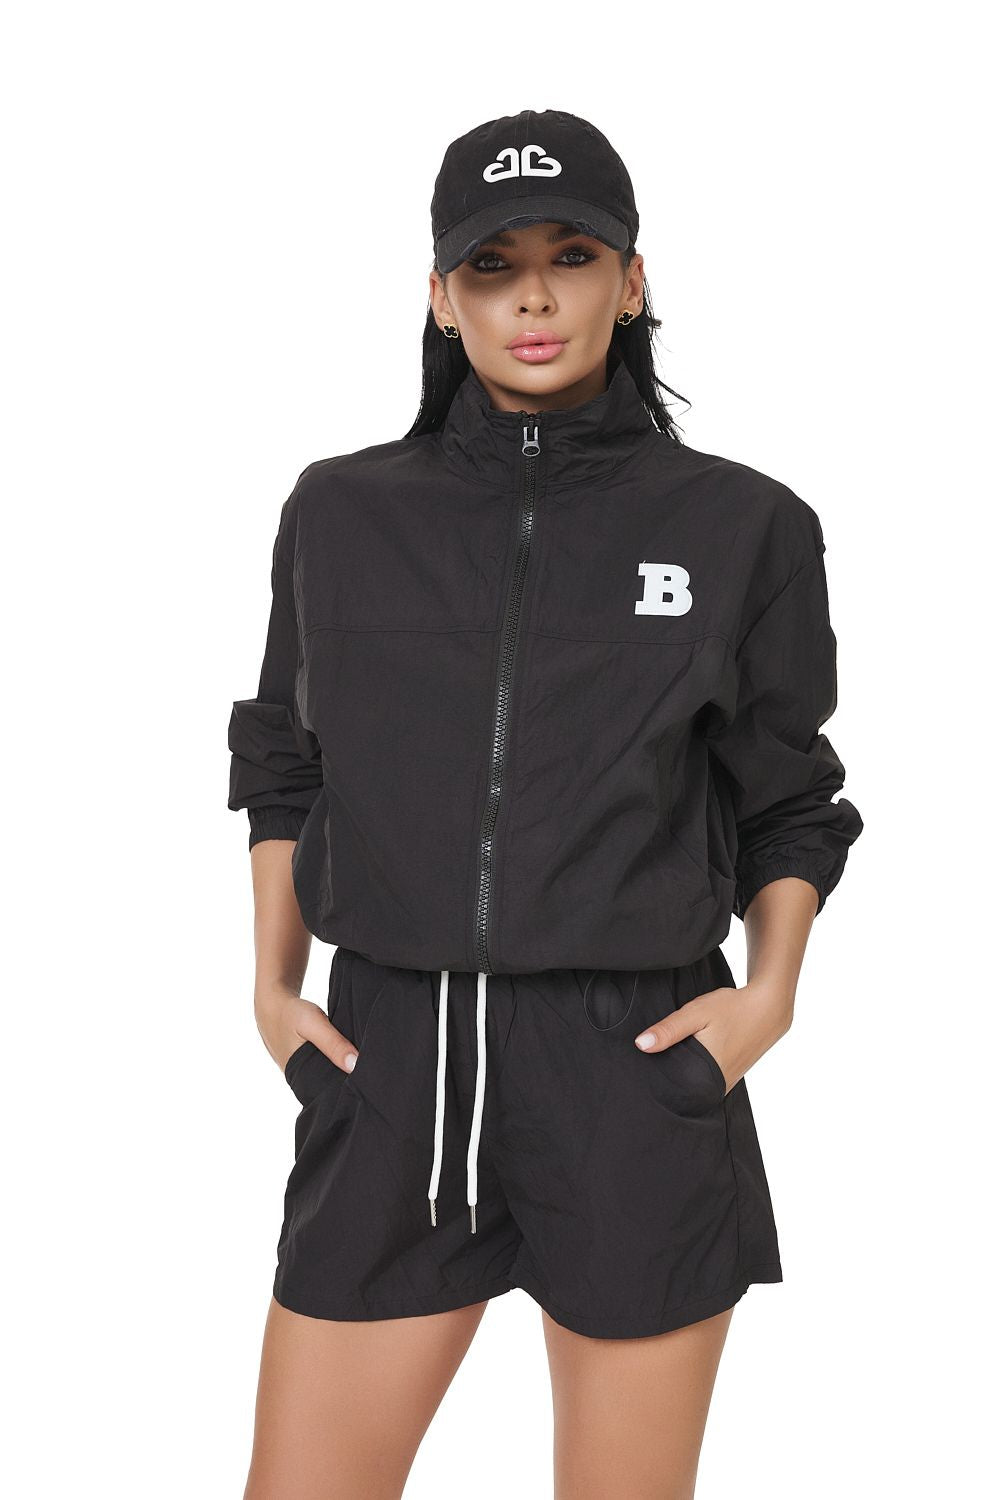 Black casual women's training suit by Teryl Bogas